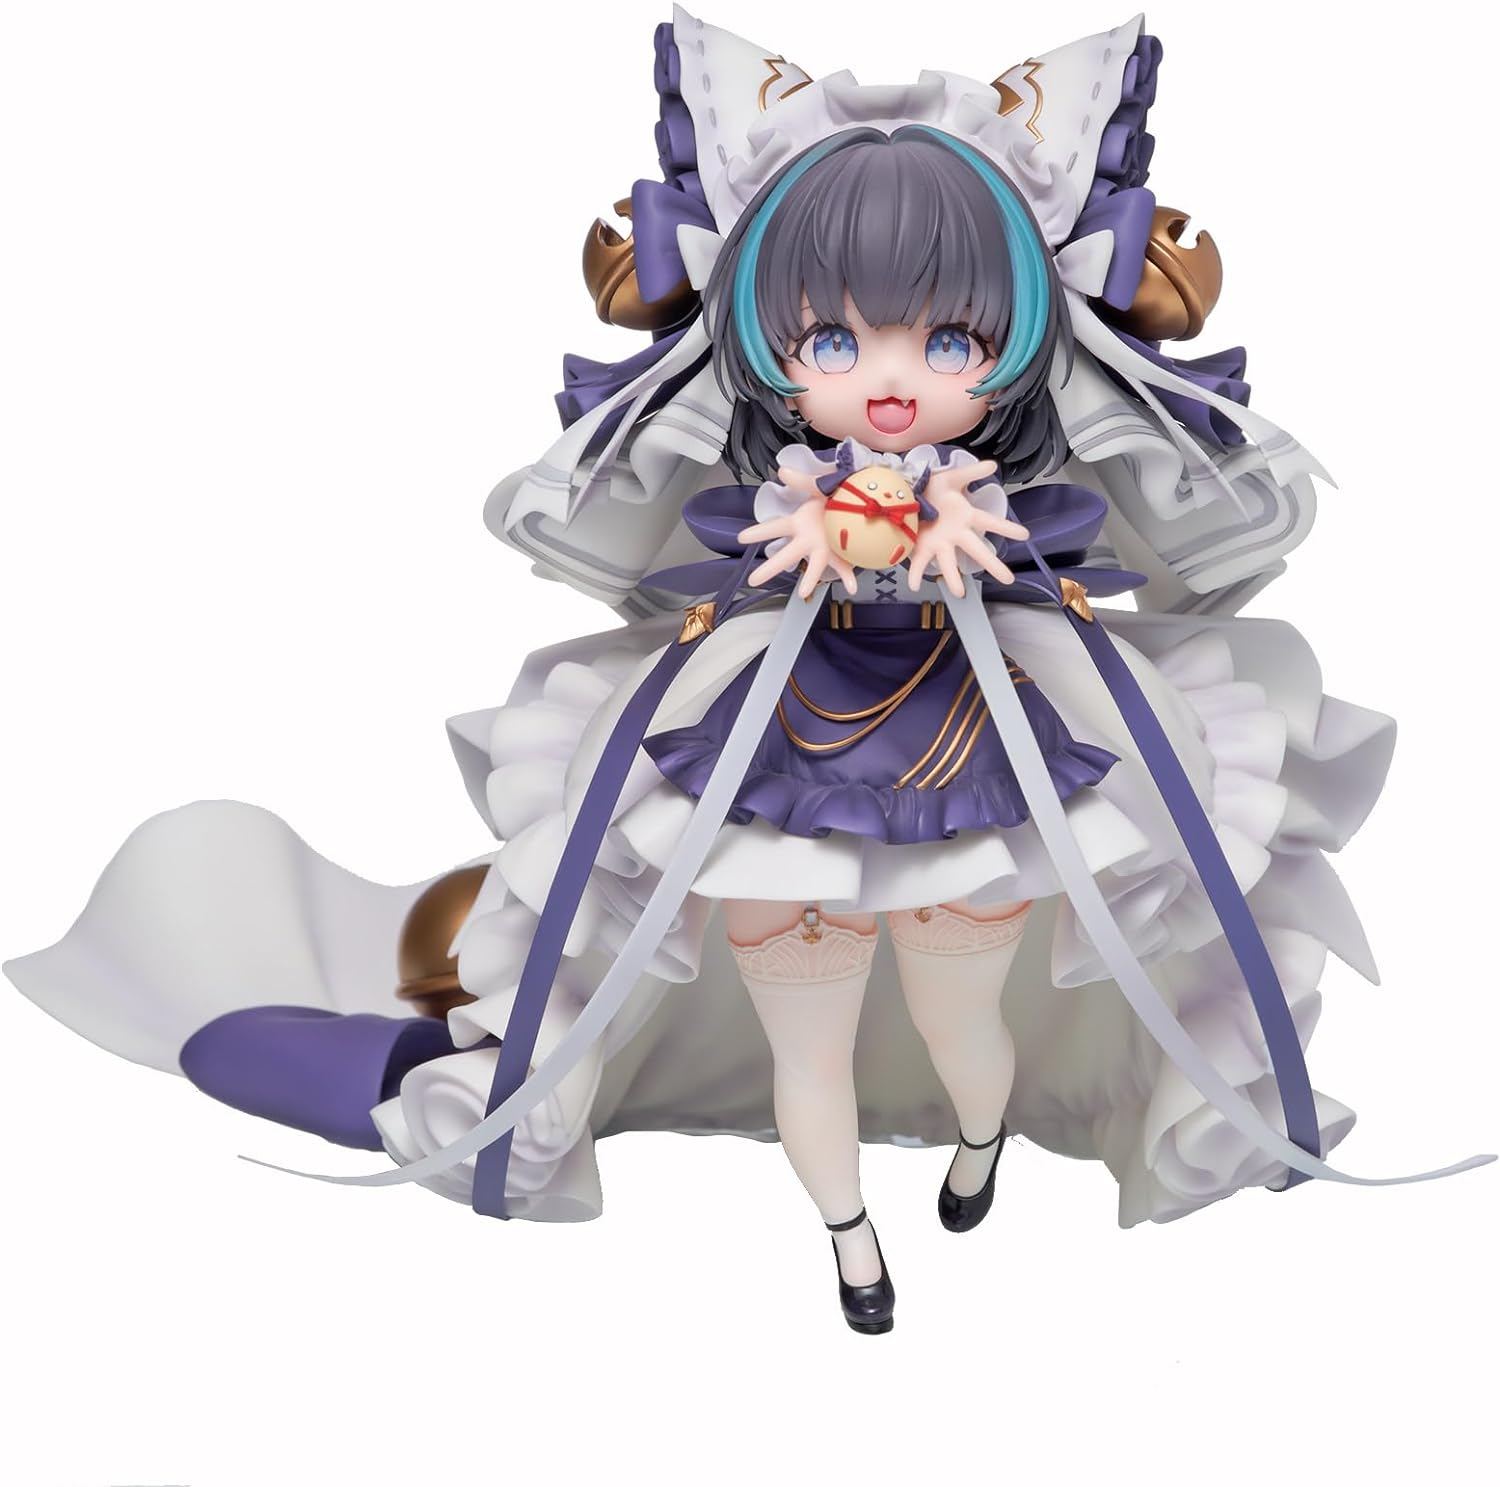 Azur Lane 1/6 Scale Pre-Painted Figure: Little Cheshire AniGame